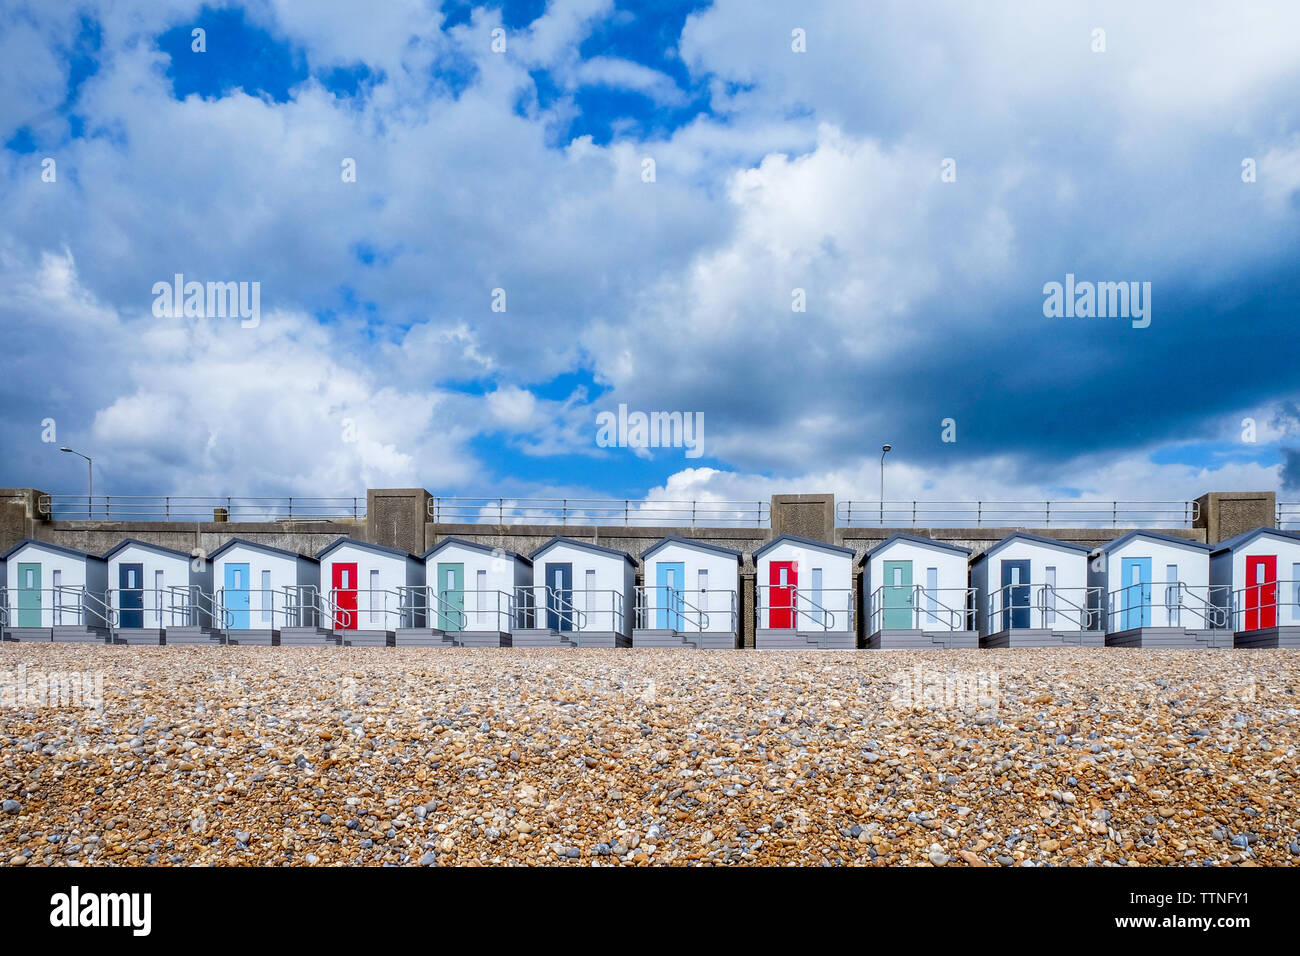 A line of 12 new Beach huts running through the centre of the image with red, blue and green doors and balconies, below is a yellow pebble beach and a Stock Photo